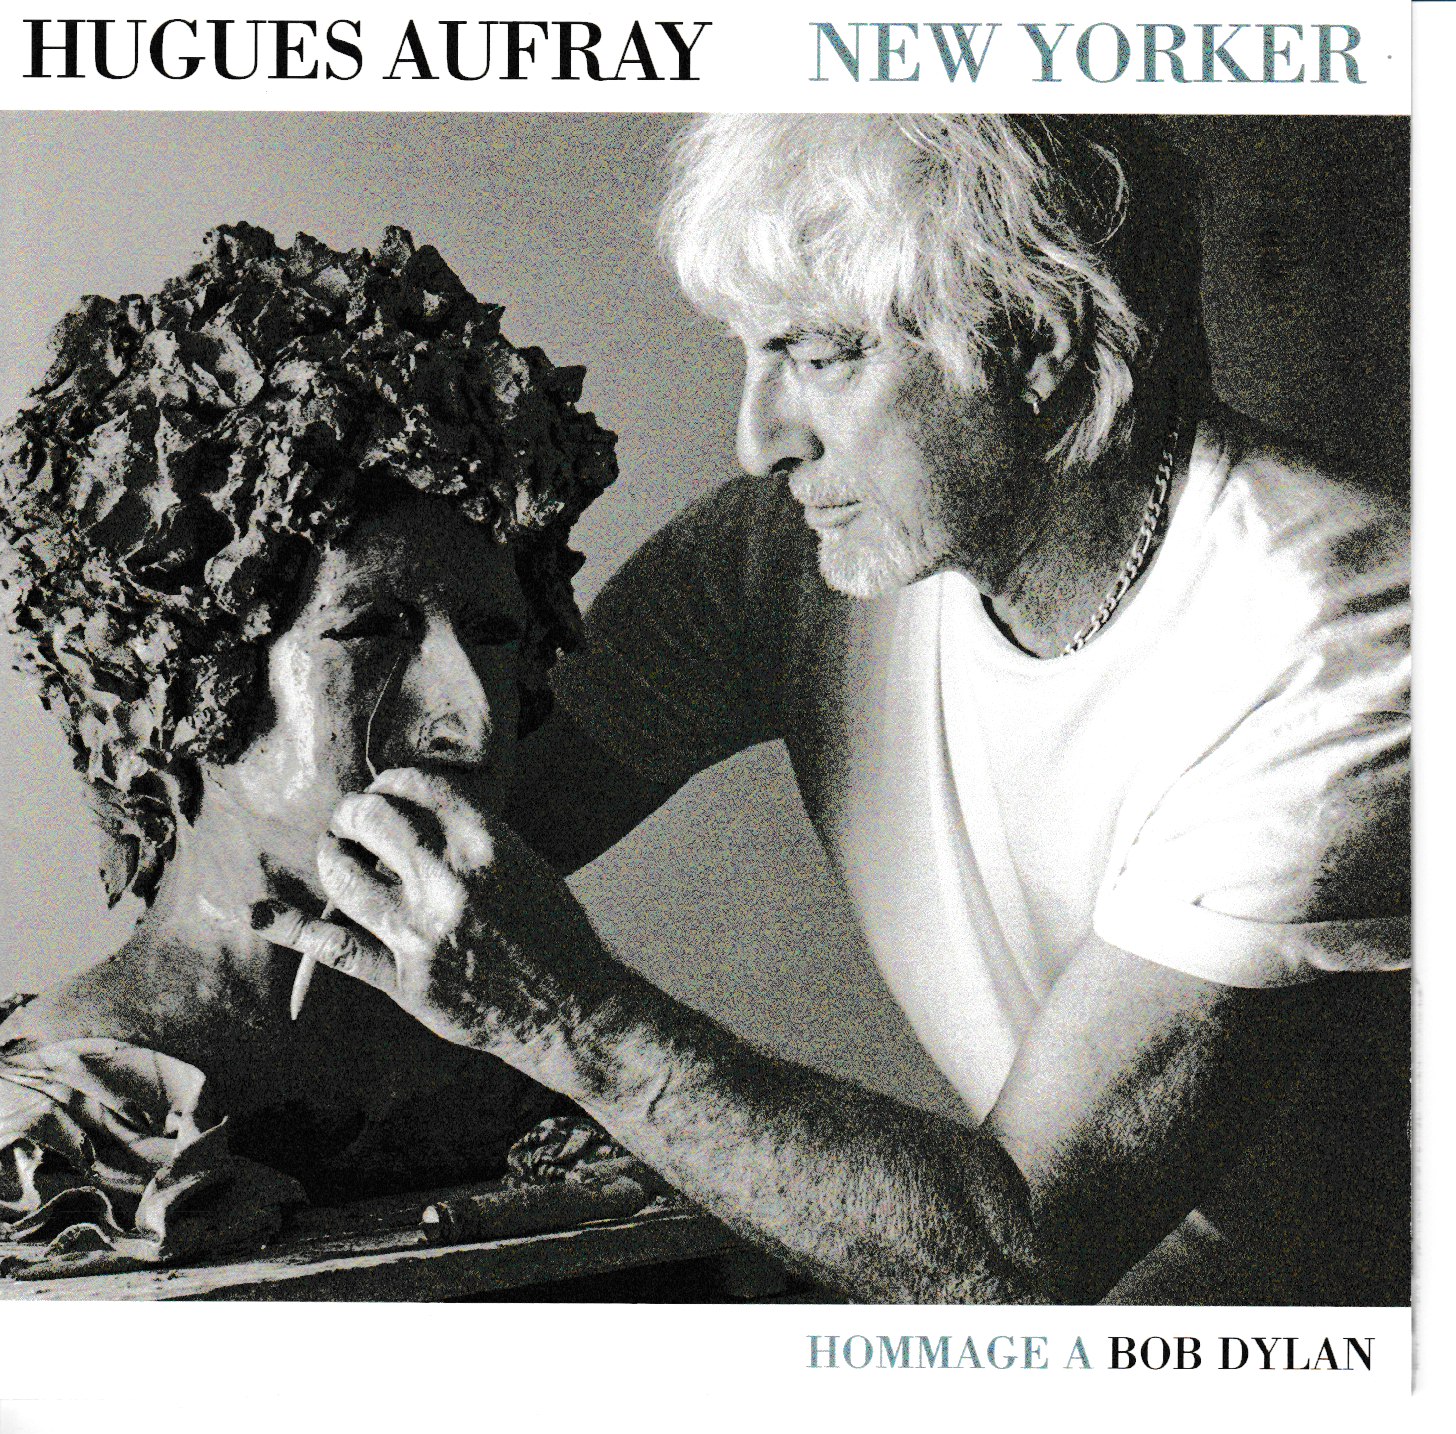 hugues aufray - New Yorker